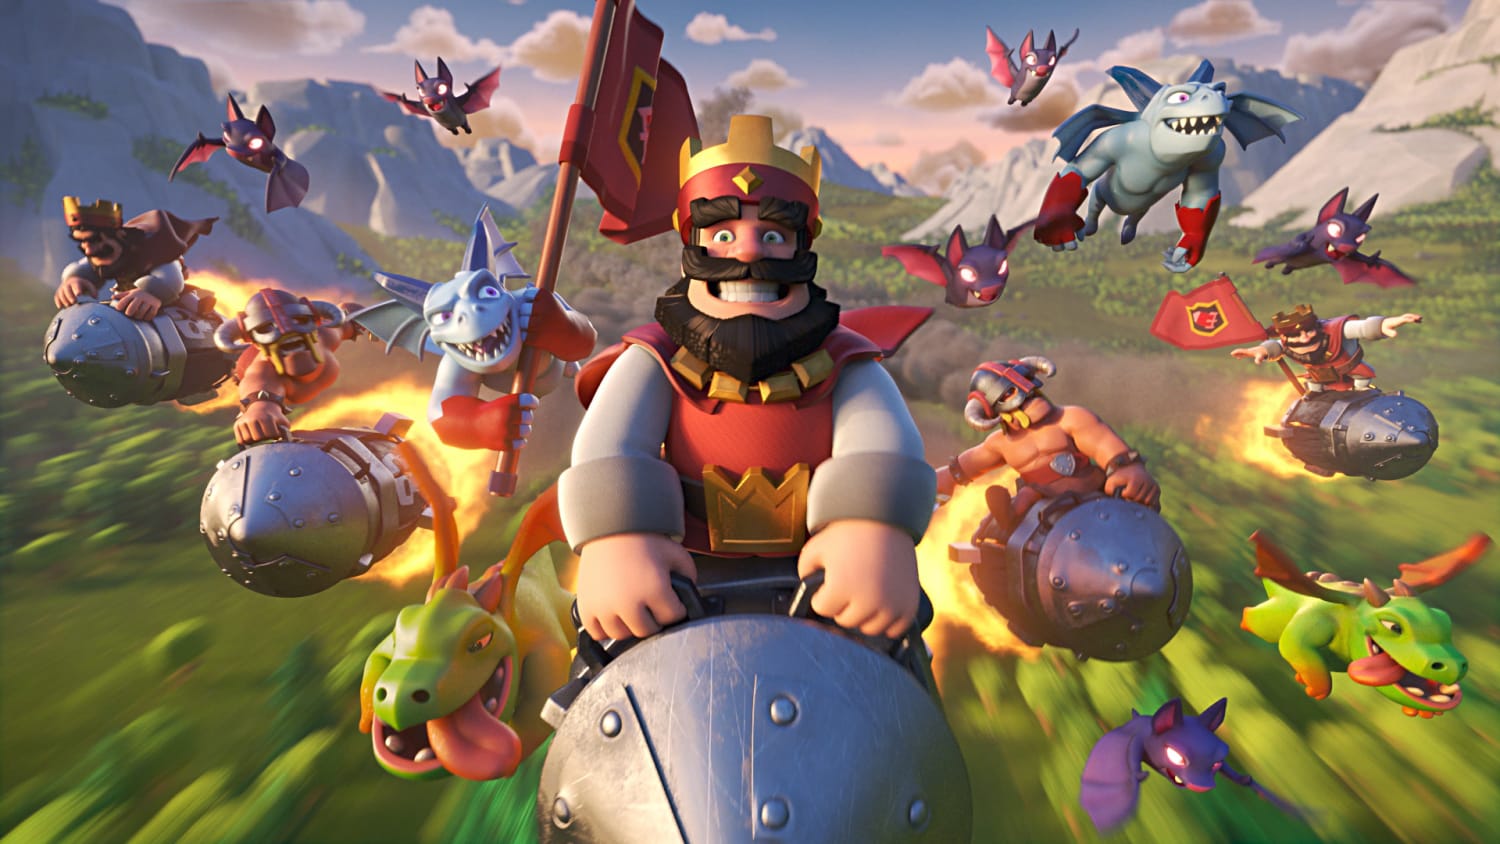 Clash Royale - Clash Royale updated their cover photo.